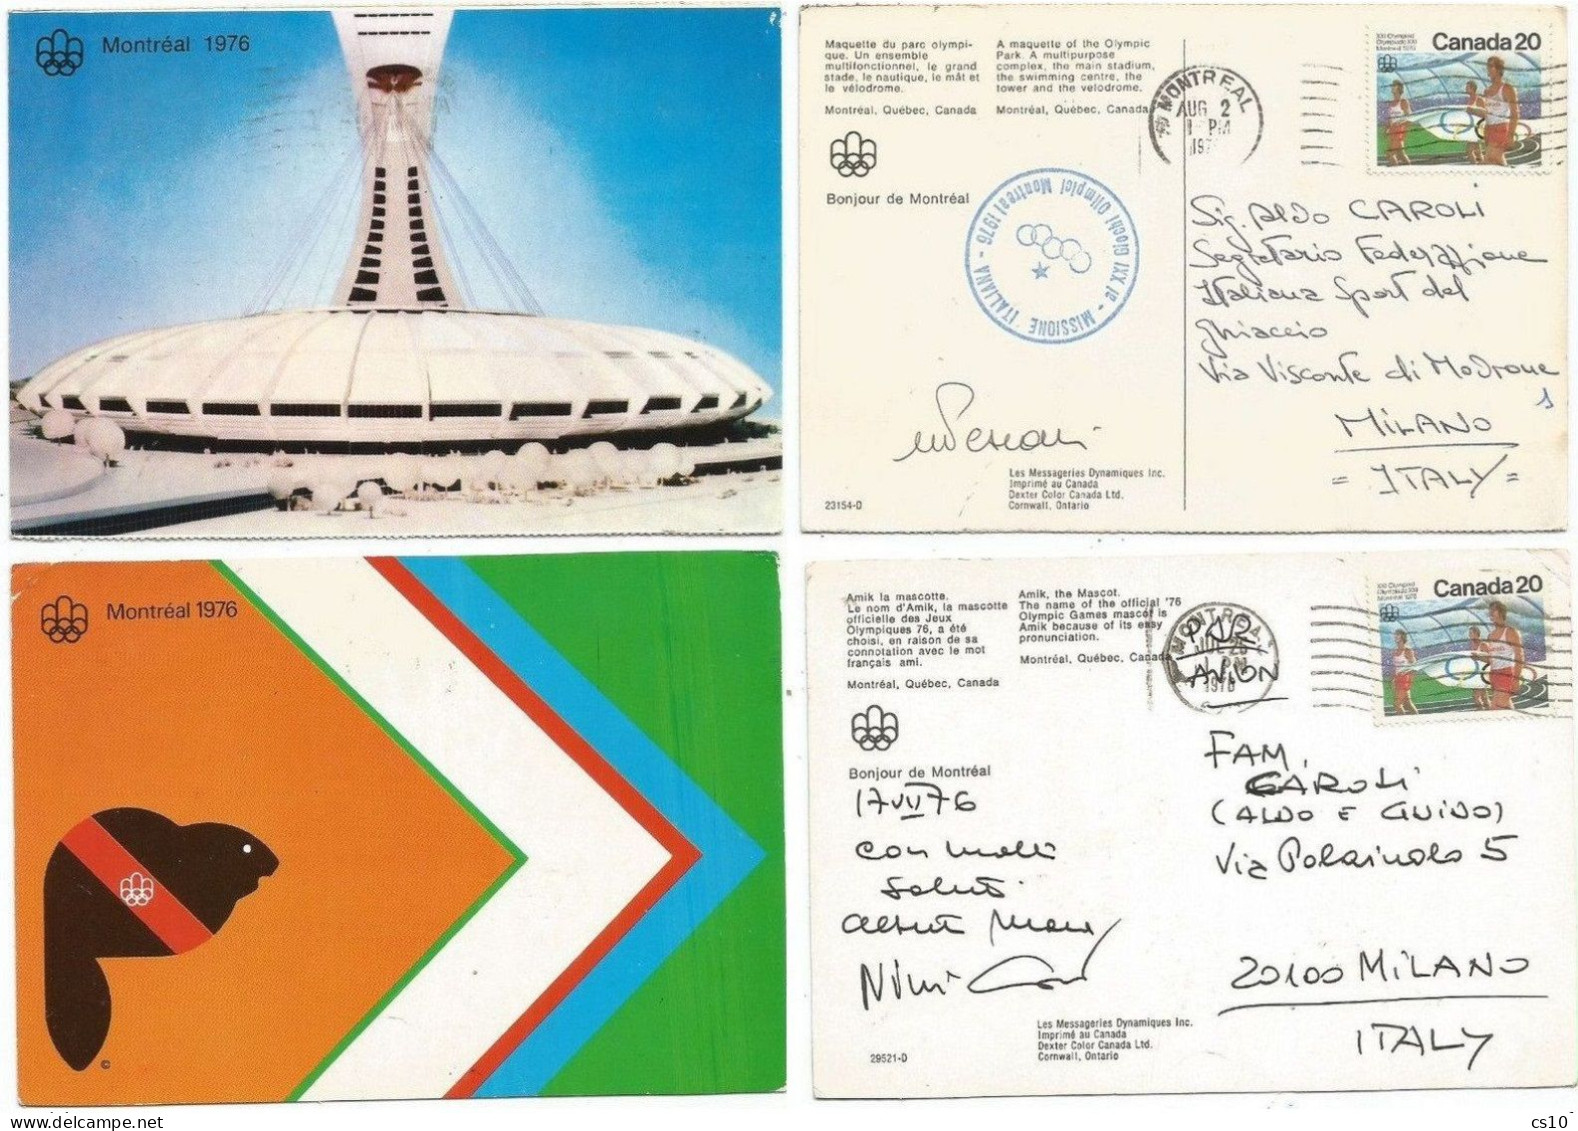 Olympic Games 1976 Montreal - Italia Mission - #2 Event Pcards By Athletes To Ice Sports Fed. President - Maximum Cards